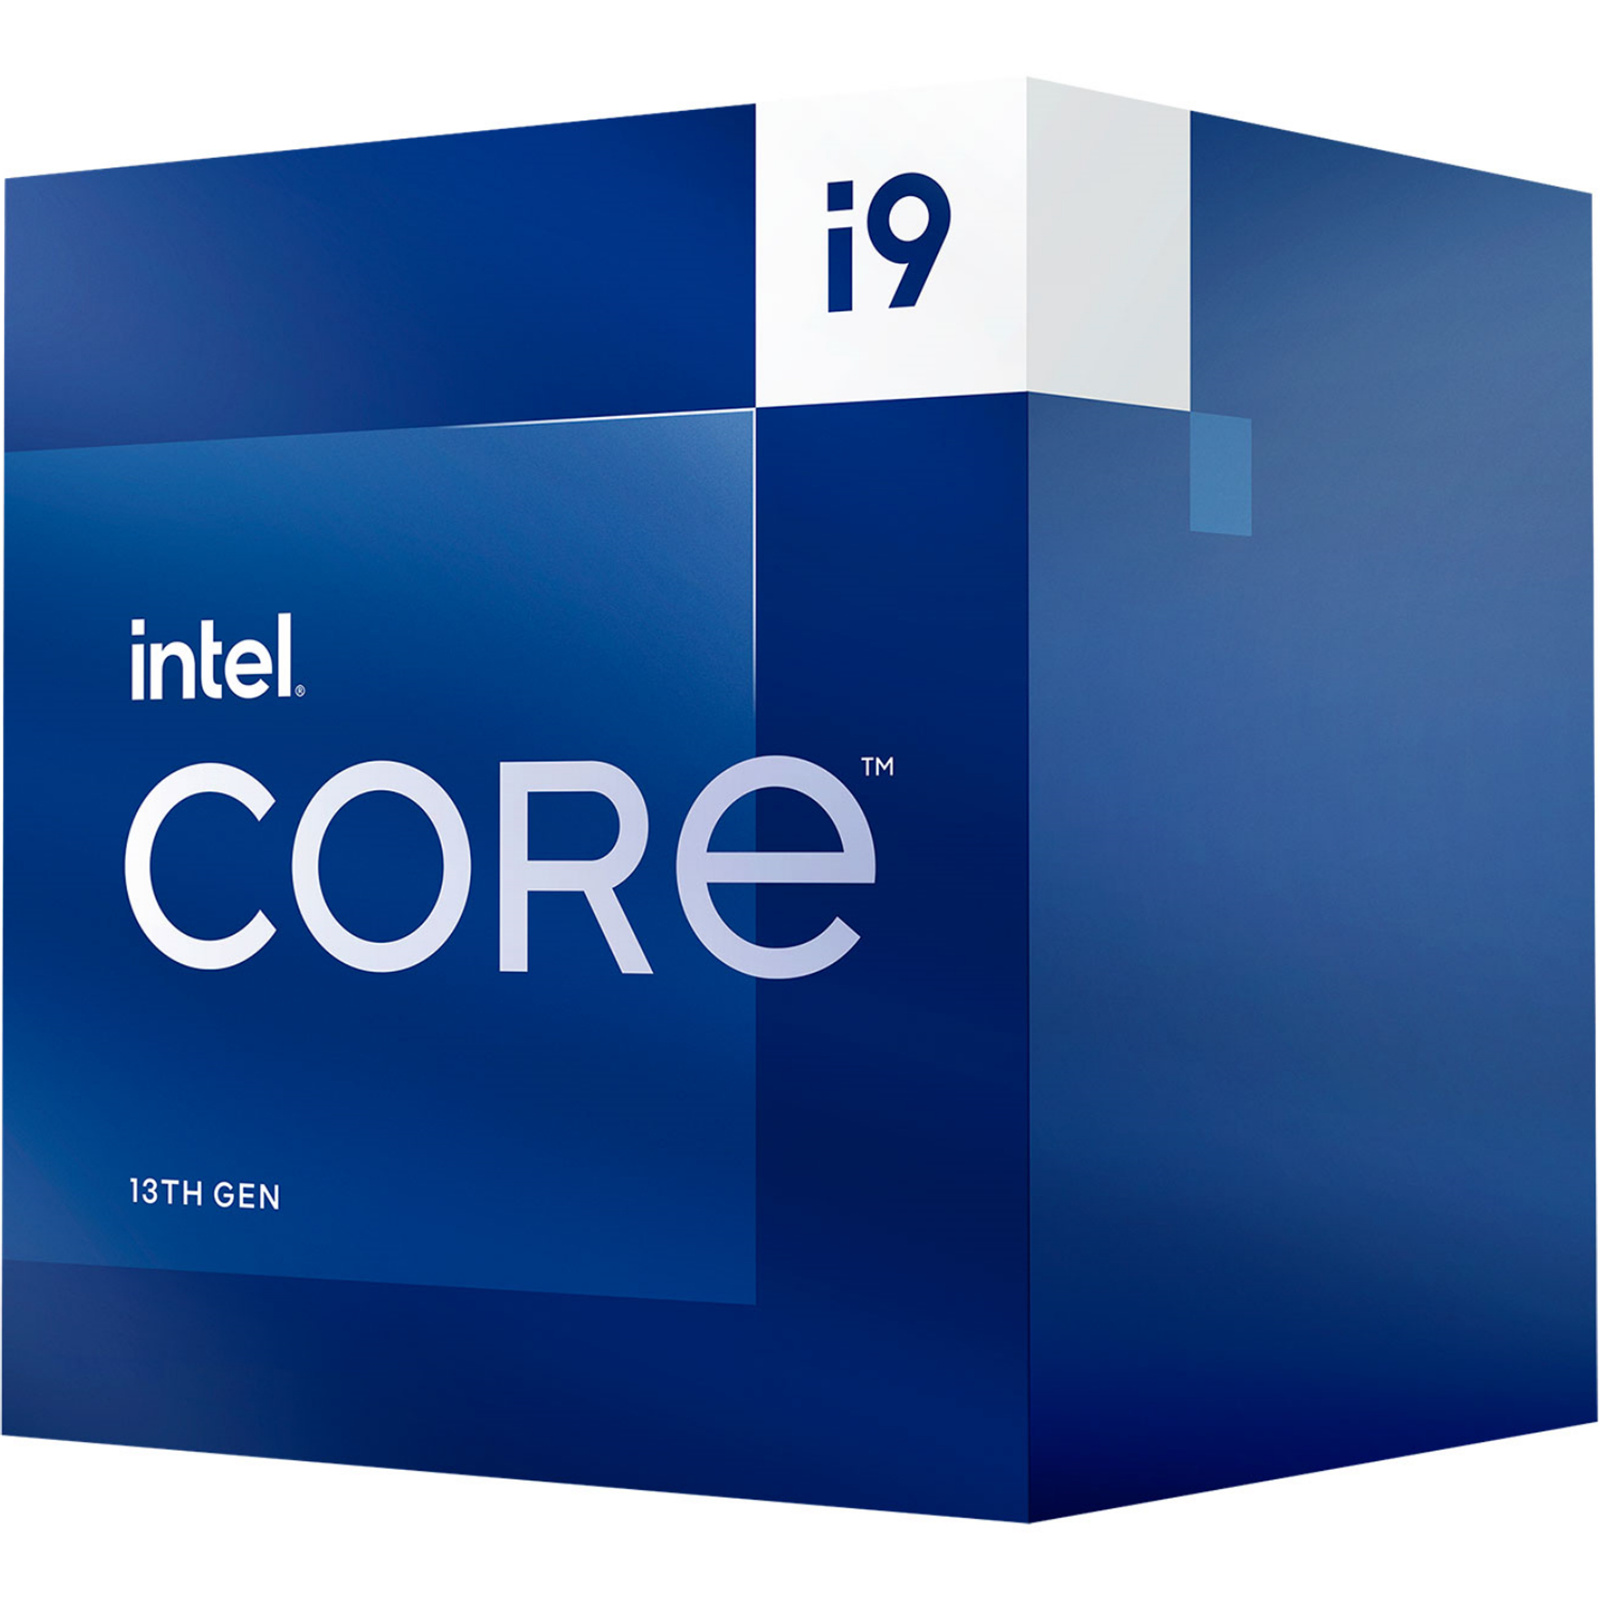 Intel Core i9 CPU Has 18 Cores, 36 Threads, And Is Built For the